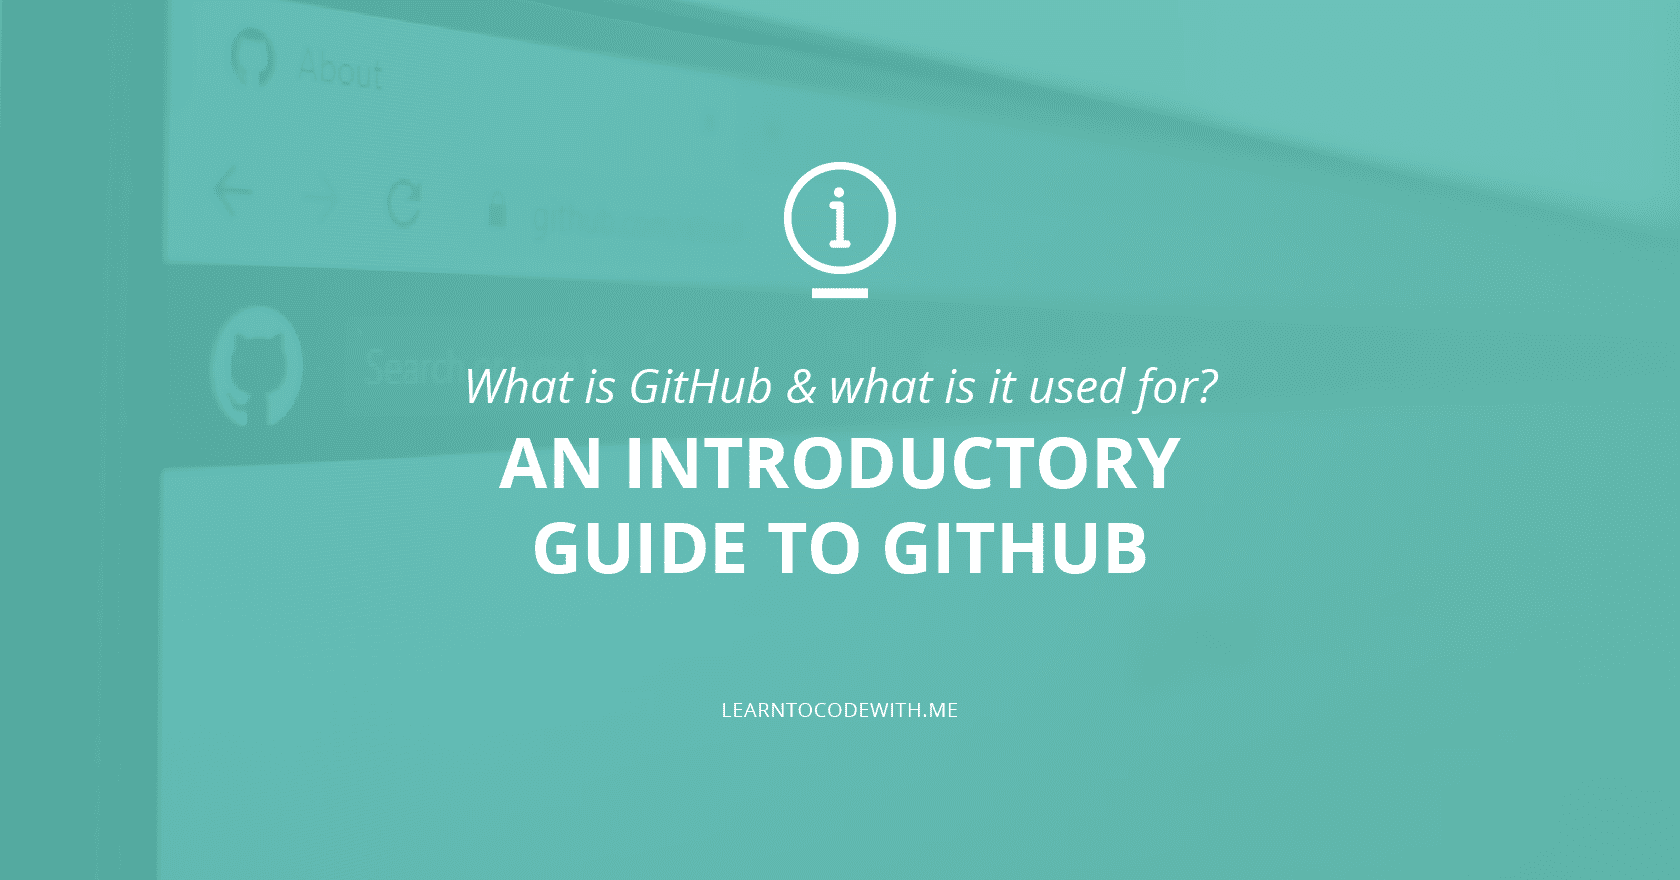 An Introductory Guide to Github